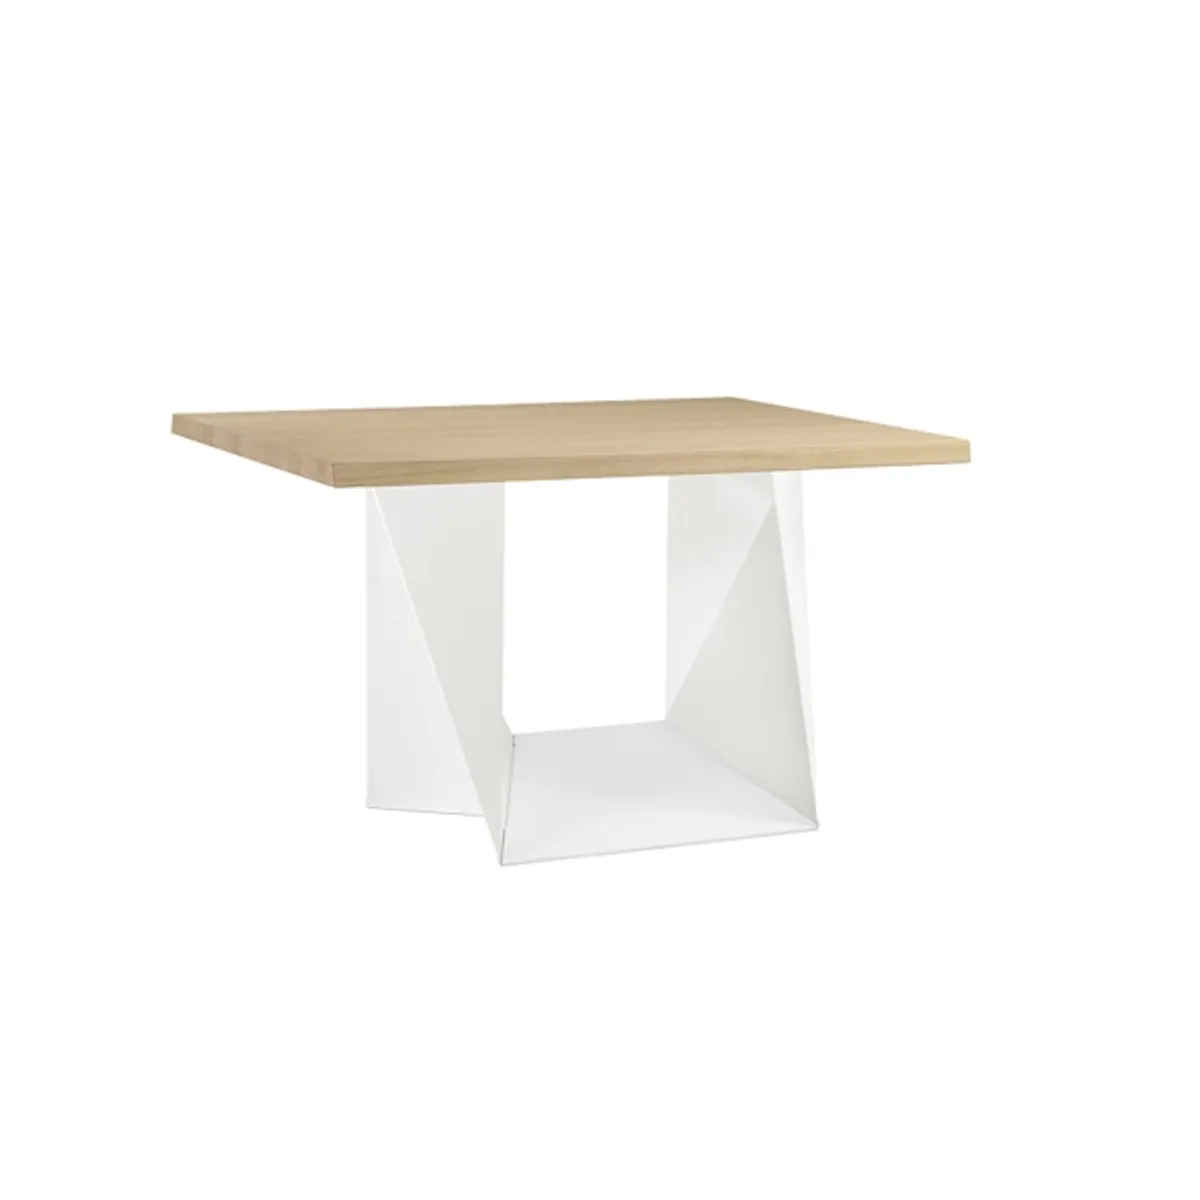 Flint square table Inside Out Contracts2